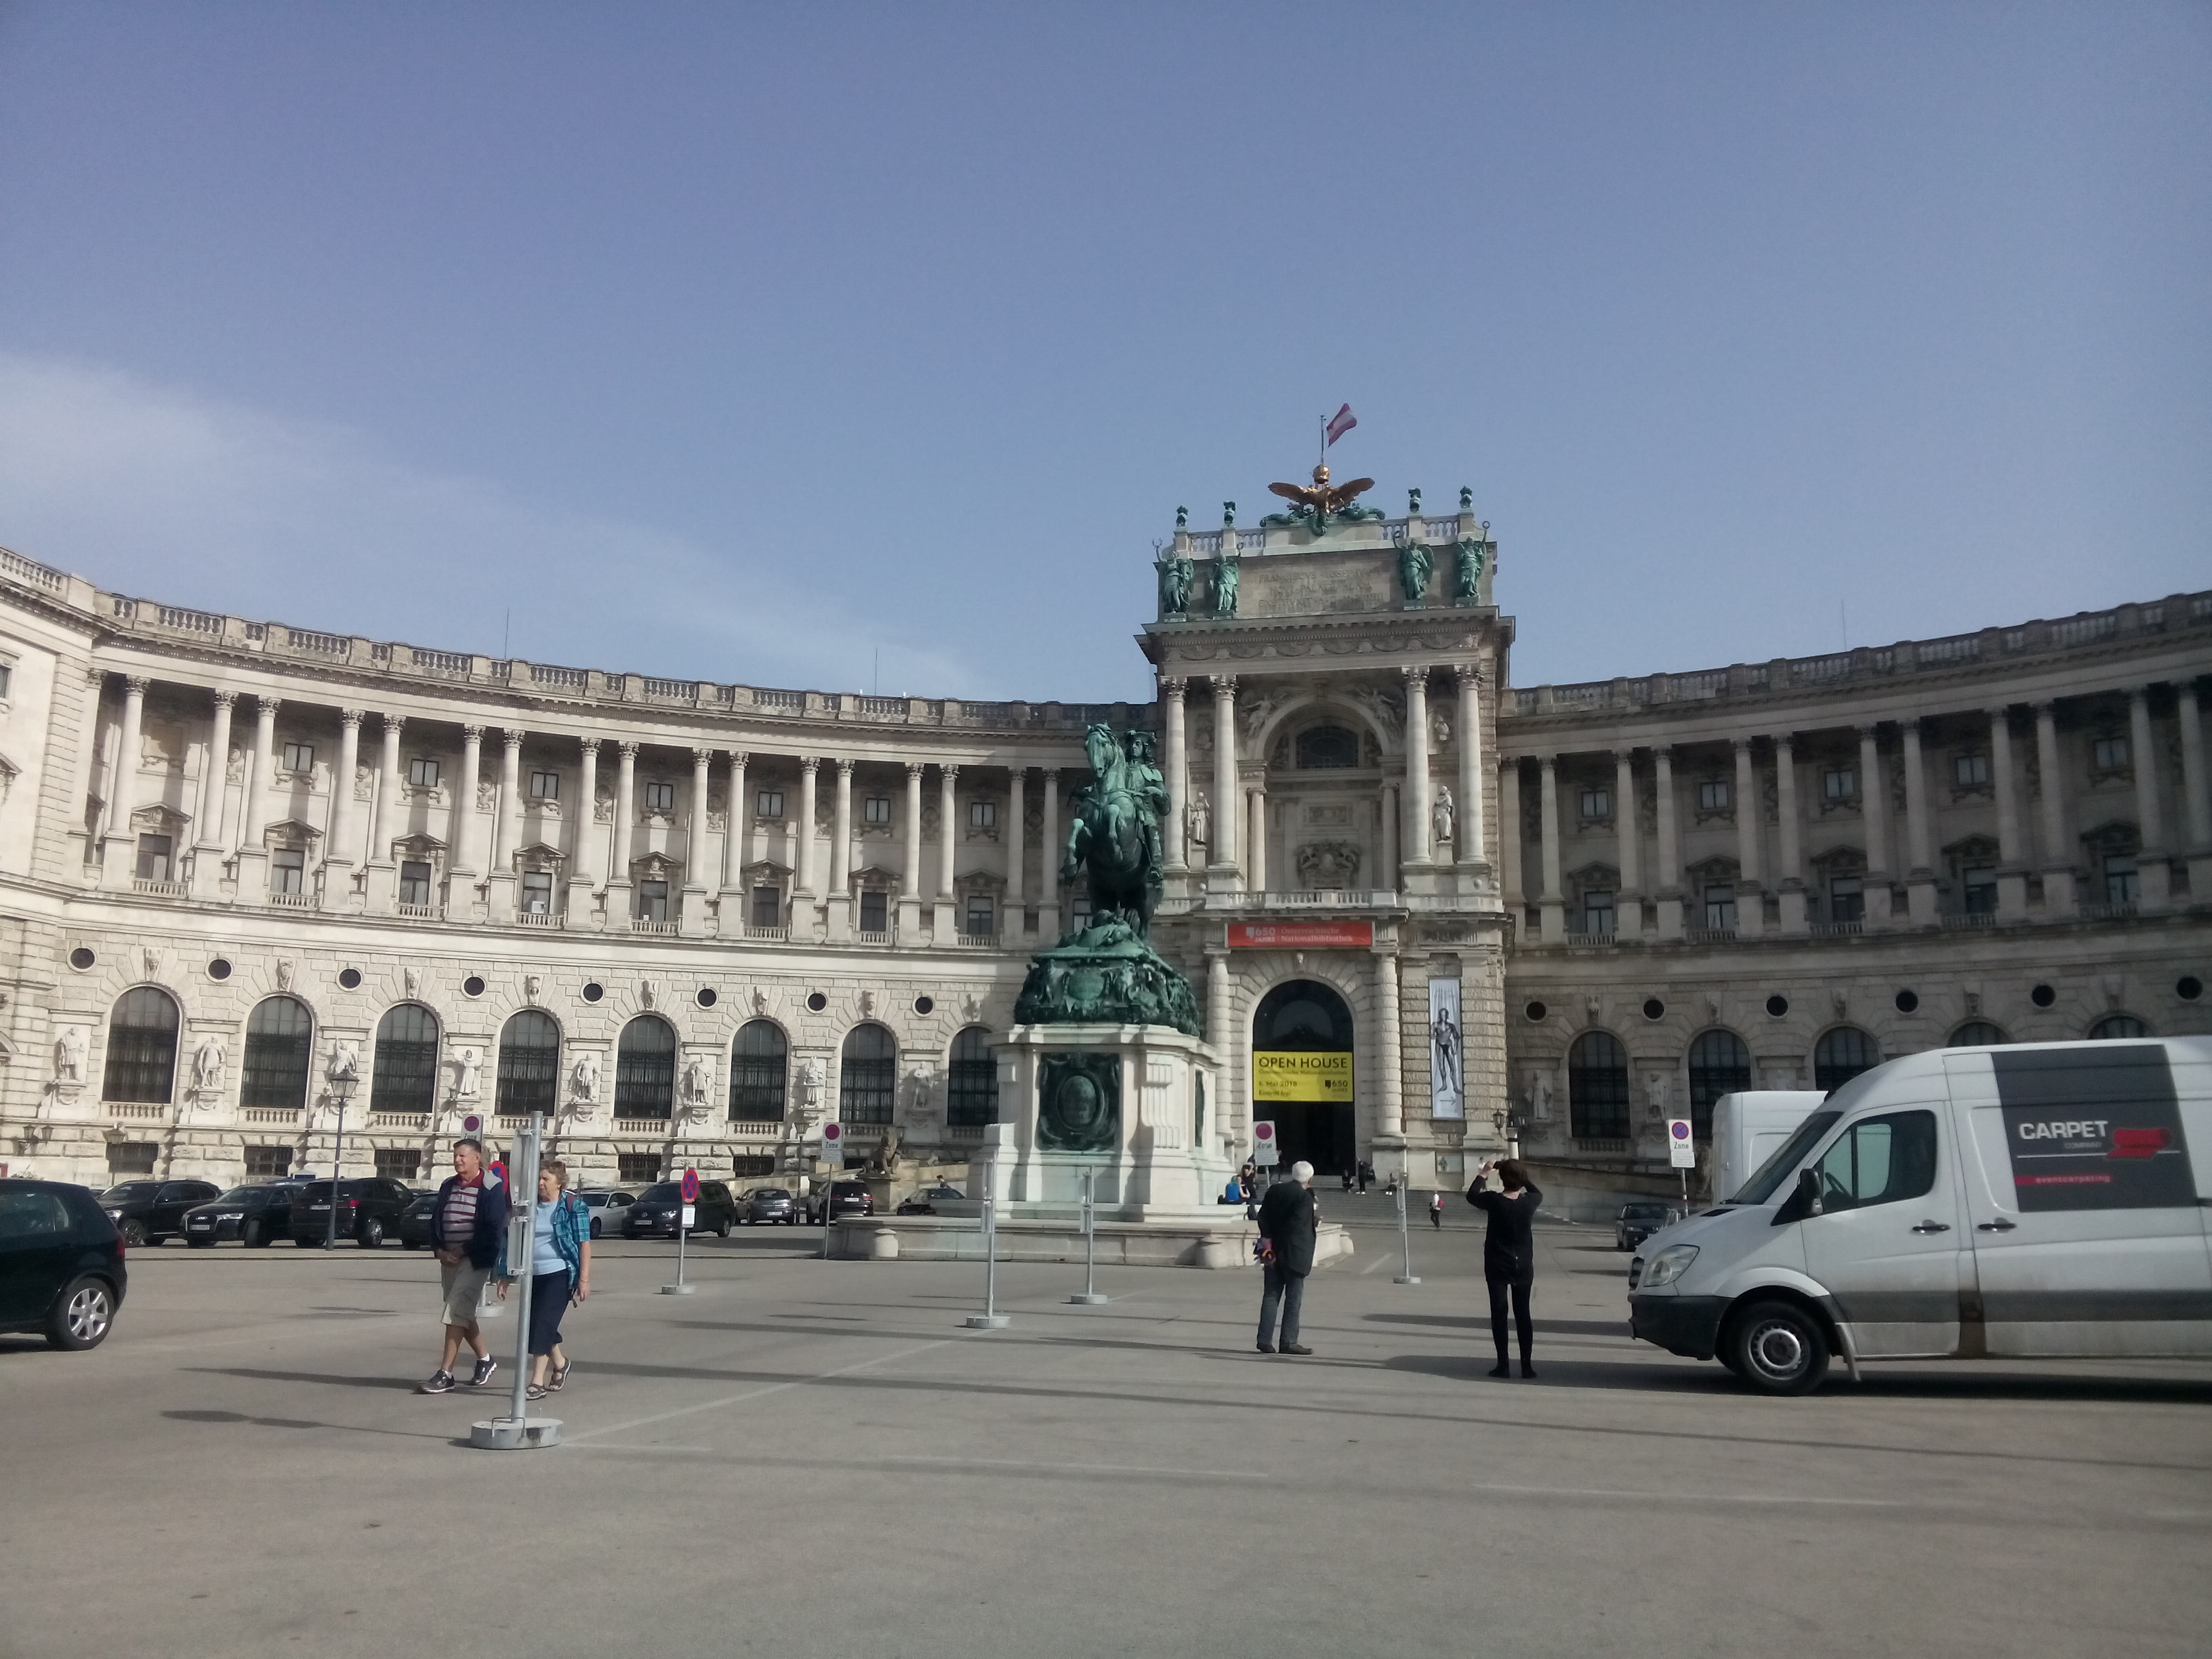 Curved grand building with a green statue, tarmac in front, some cars and tourists